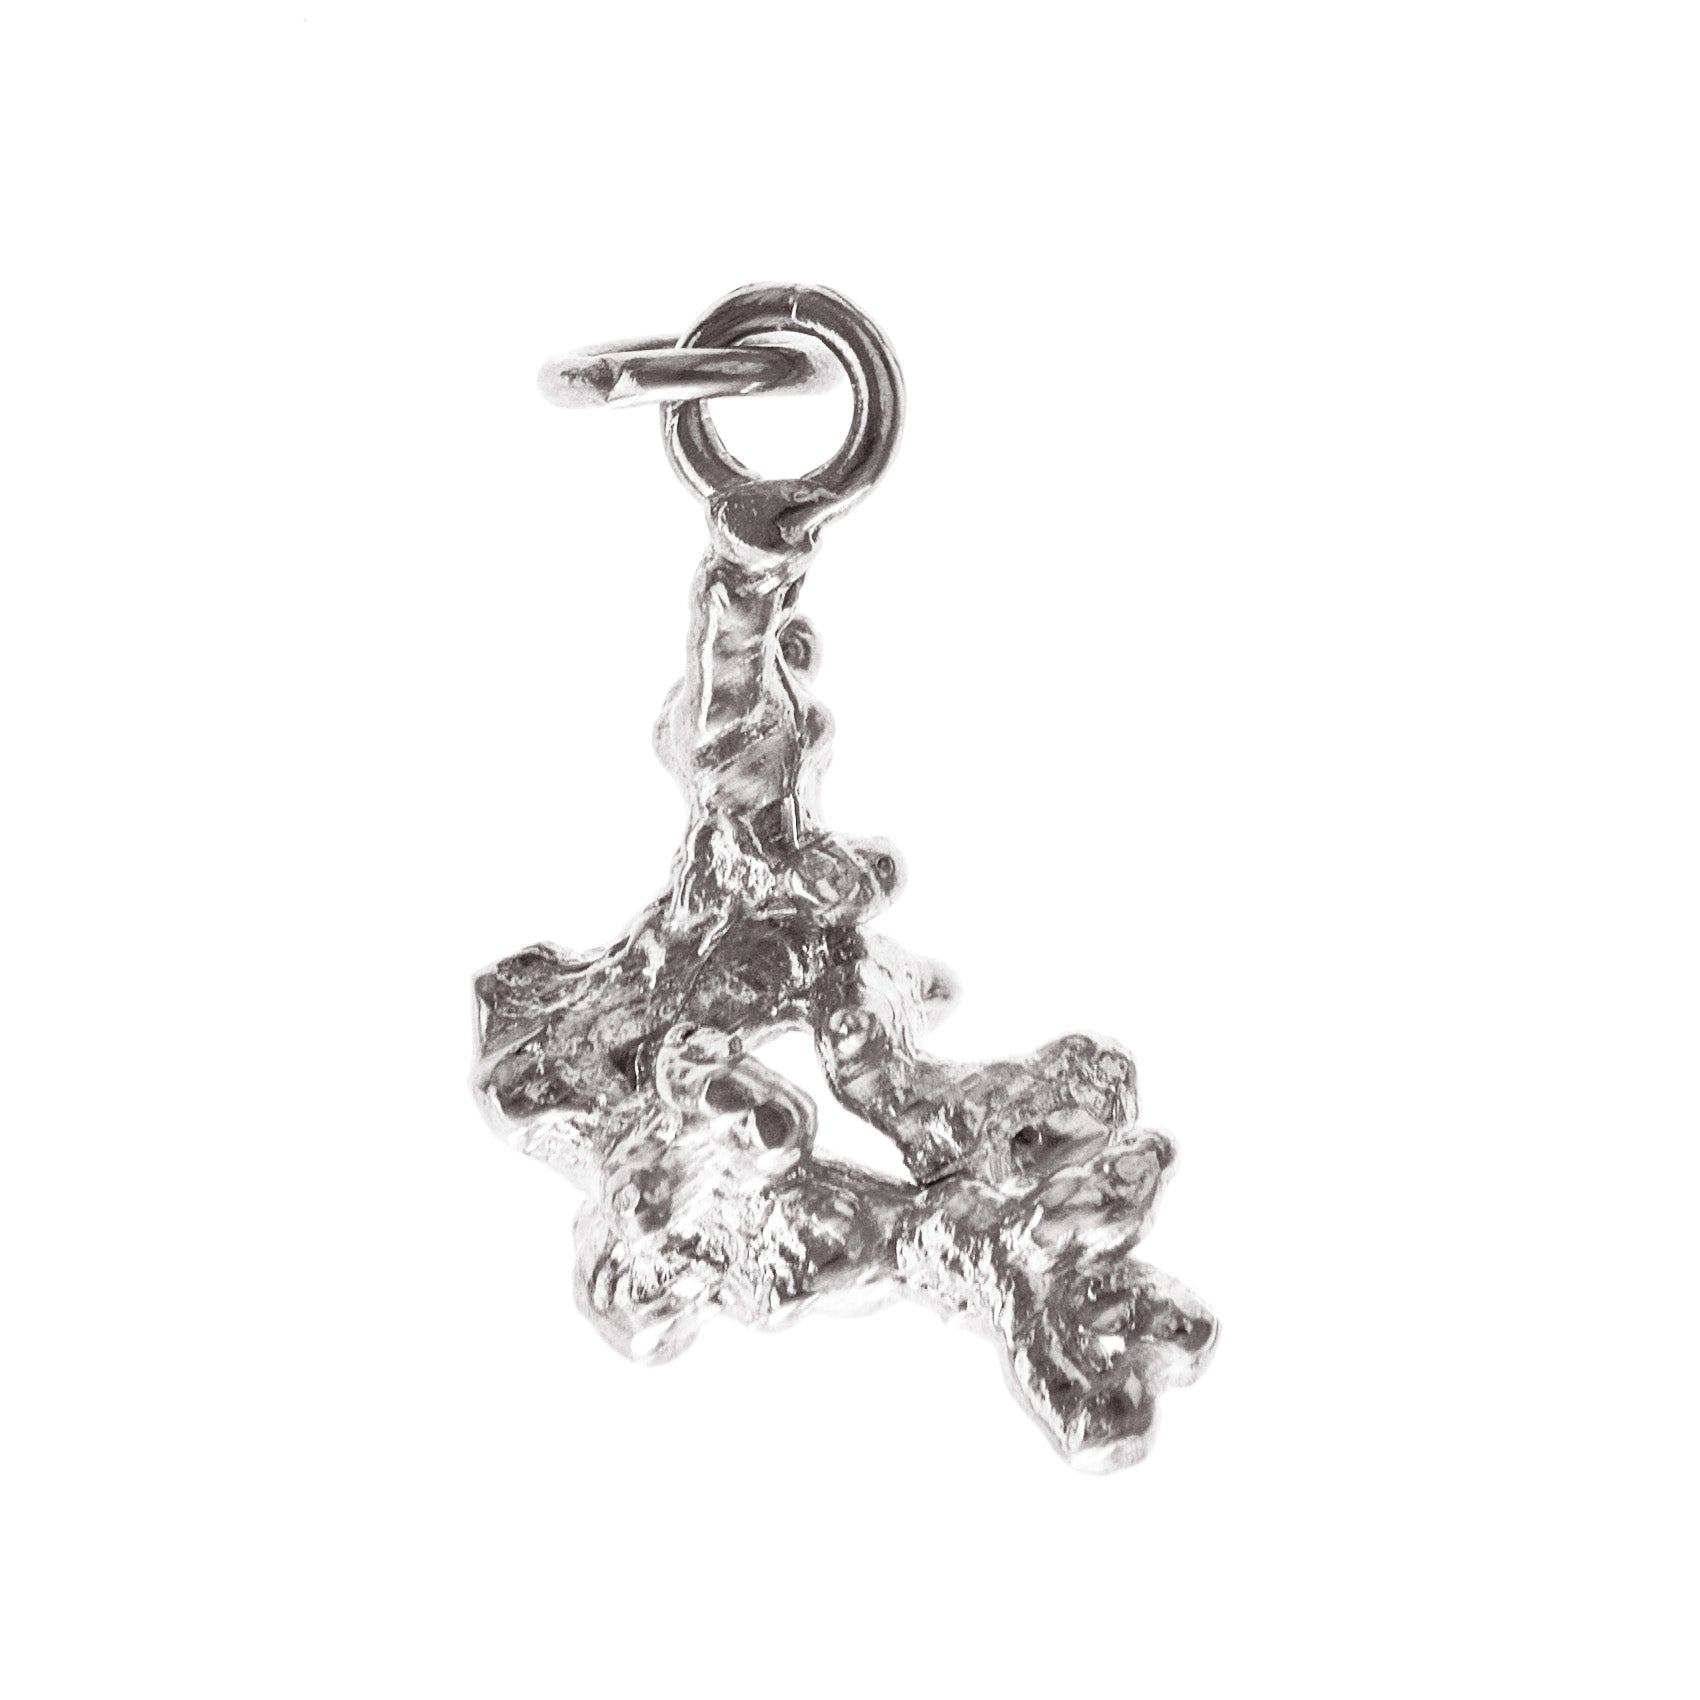 Corallia Speos Charm - Recycled Sterling Silver